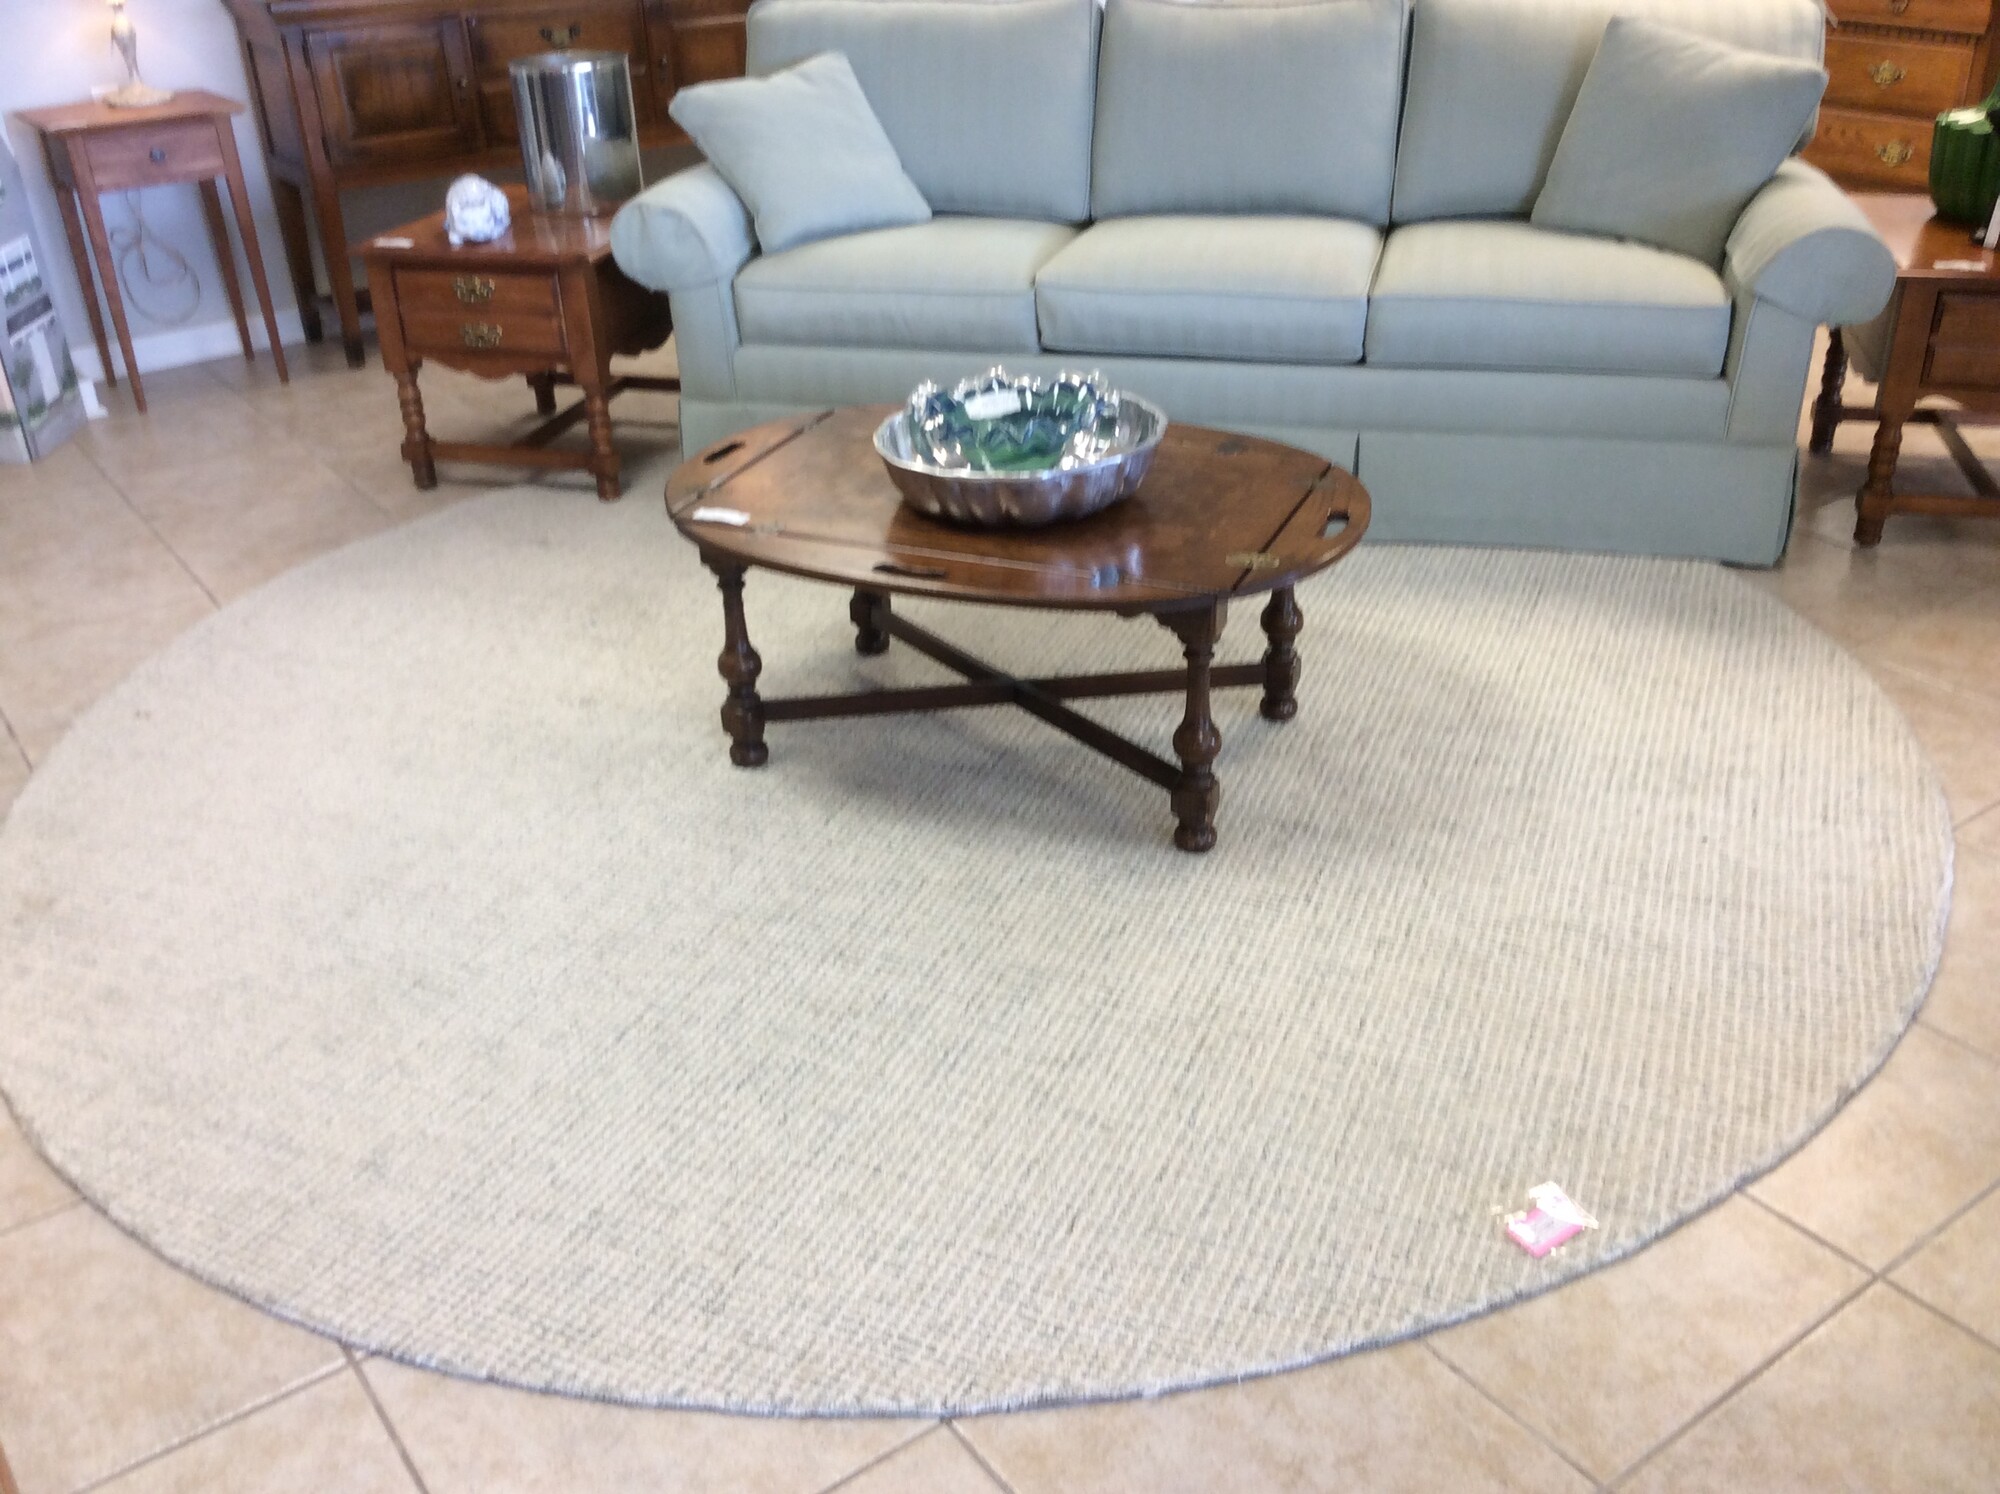 This is a beautiful Mint Green & Cream Round Woven Rug.